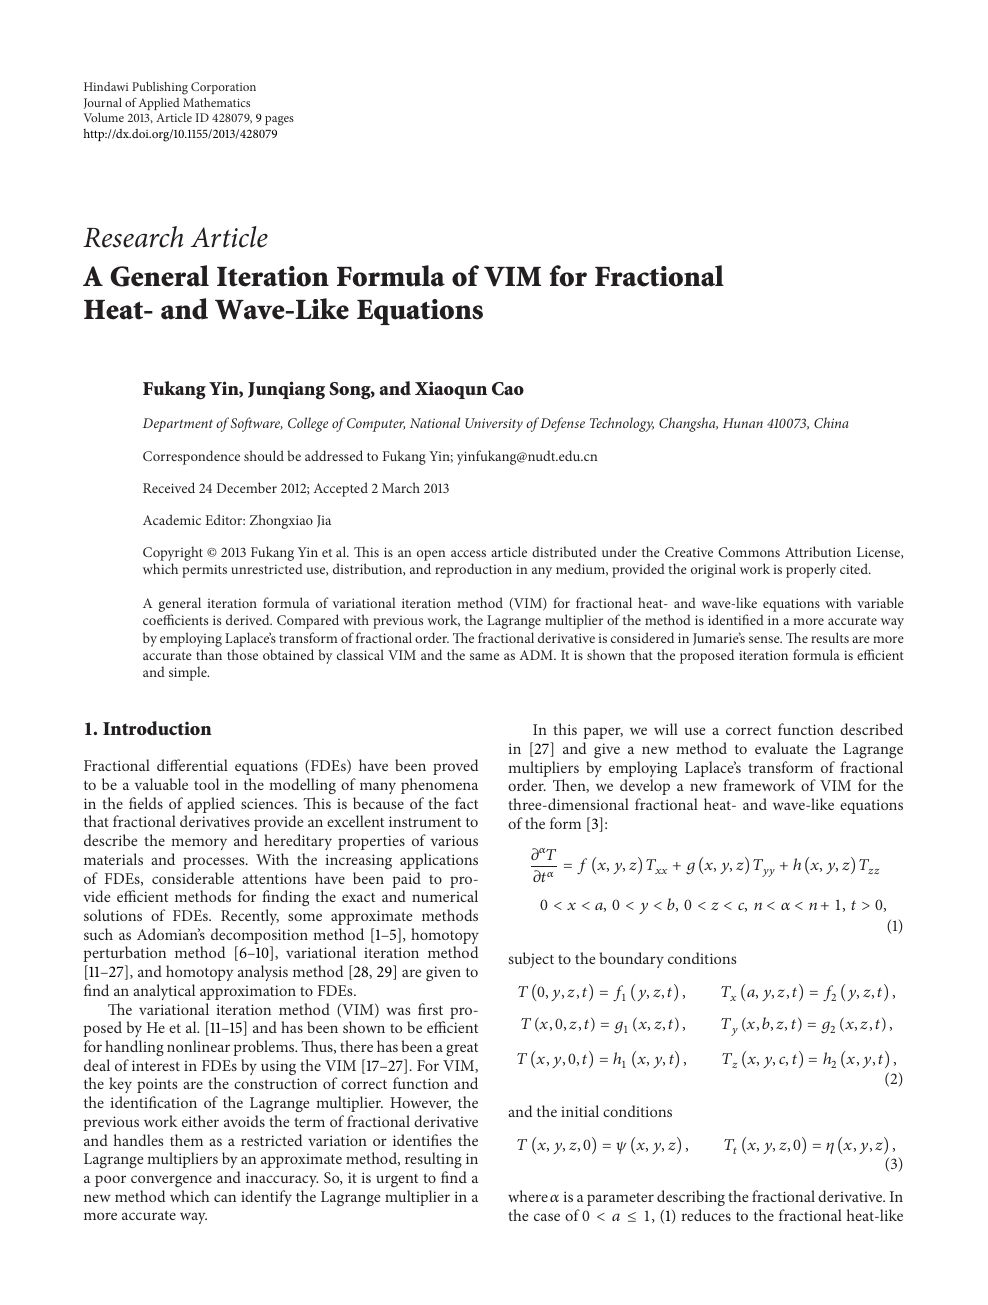 A General Iteration Formula Of Vim For Fractional Heat And Wave Like Equations Topic Of Research Paper In Mathematics Download Scholarly Article Pdf And Read For Free On Cyberleninka Open Science Hub